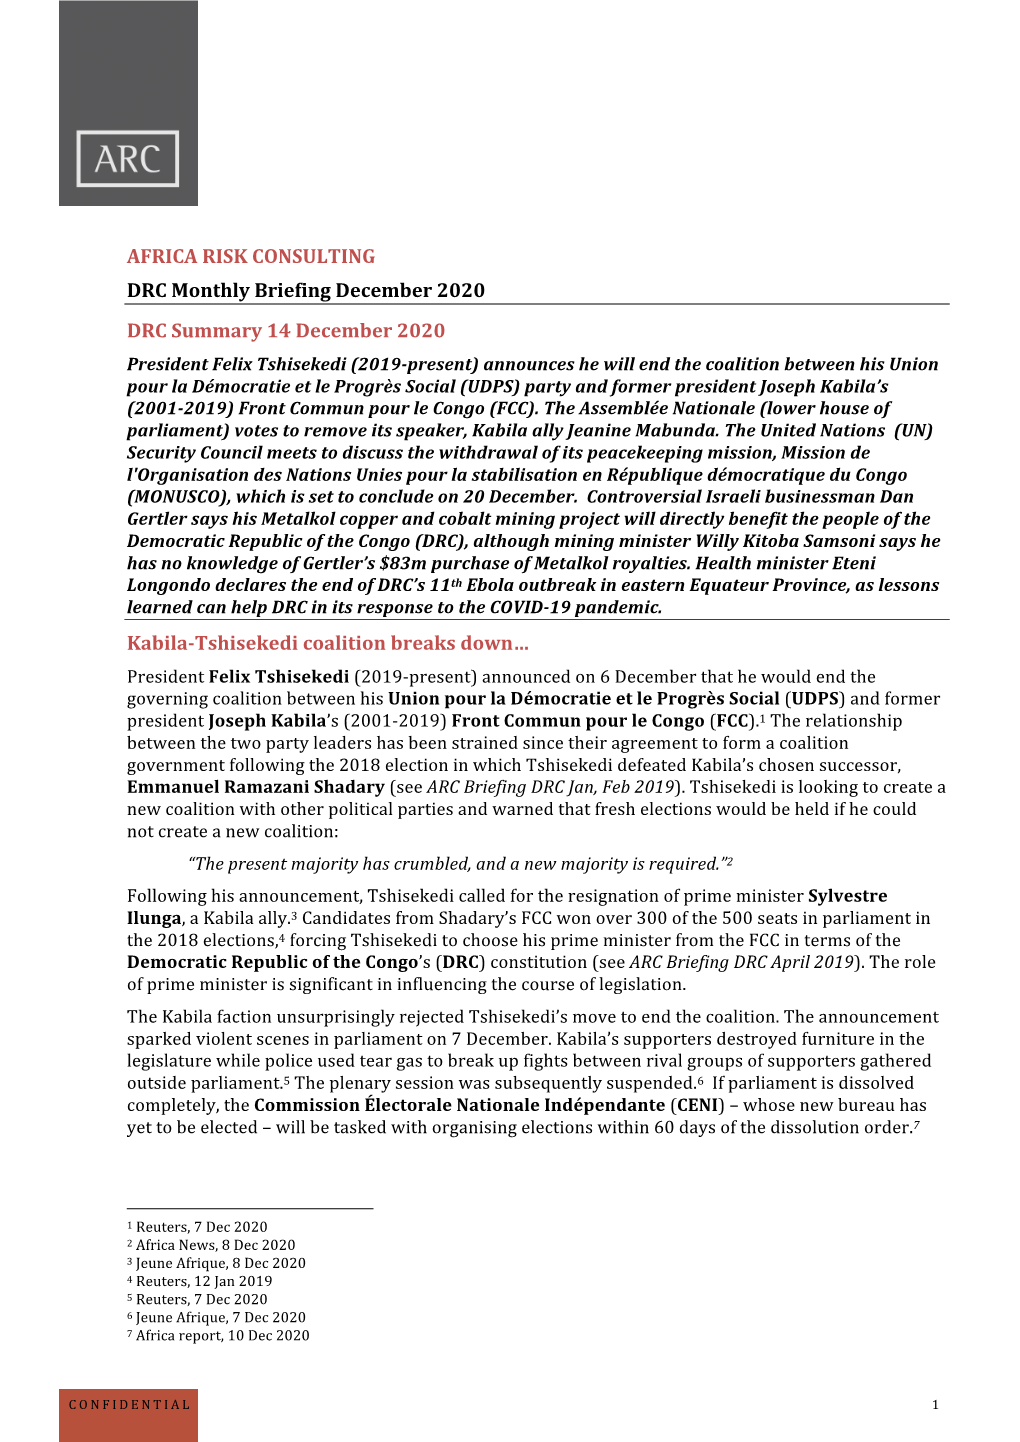 AFRICA RISK CONSULTING DRC Monthly Briefing December 2020